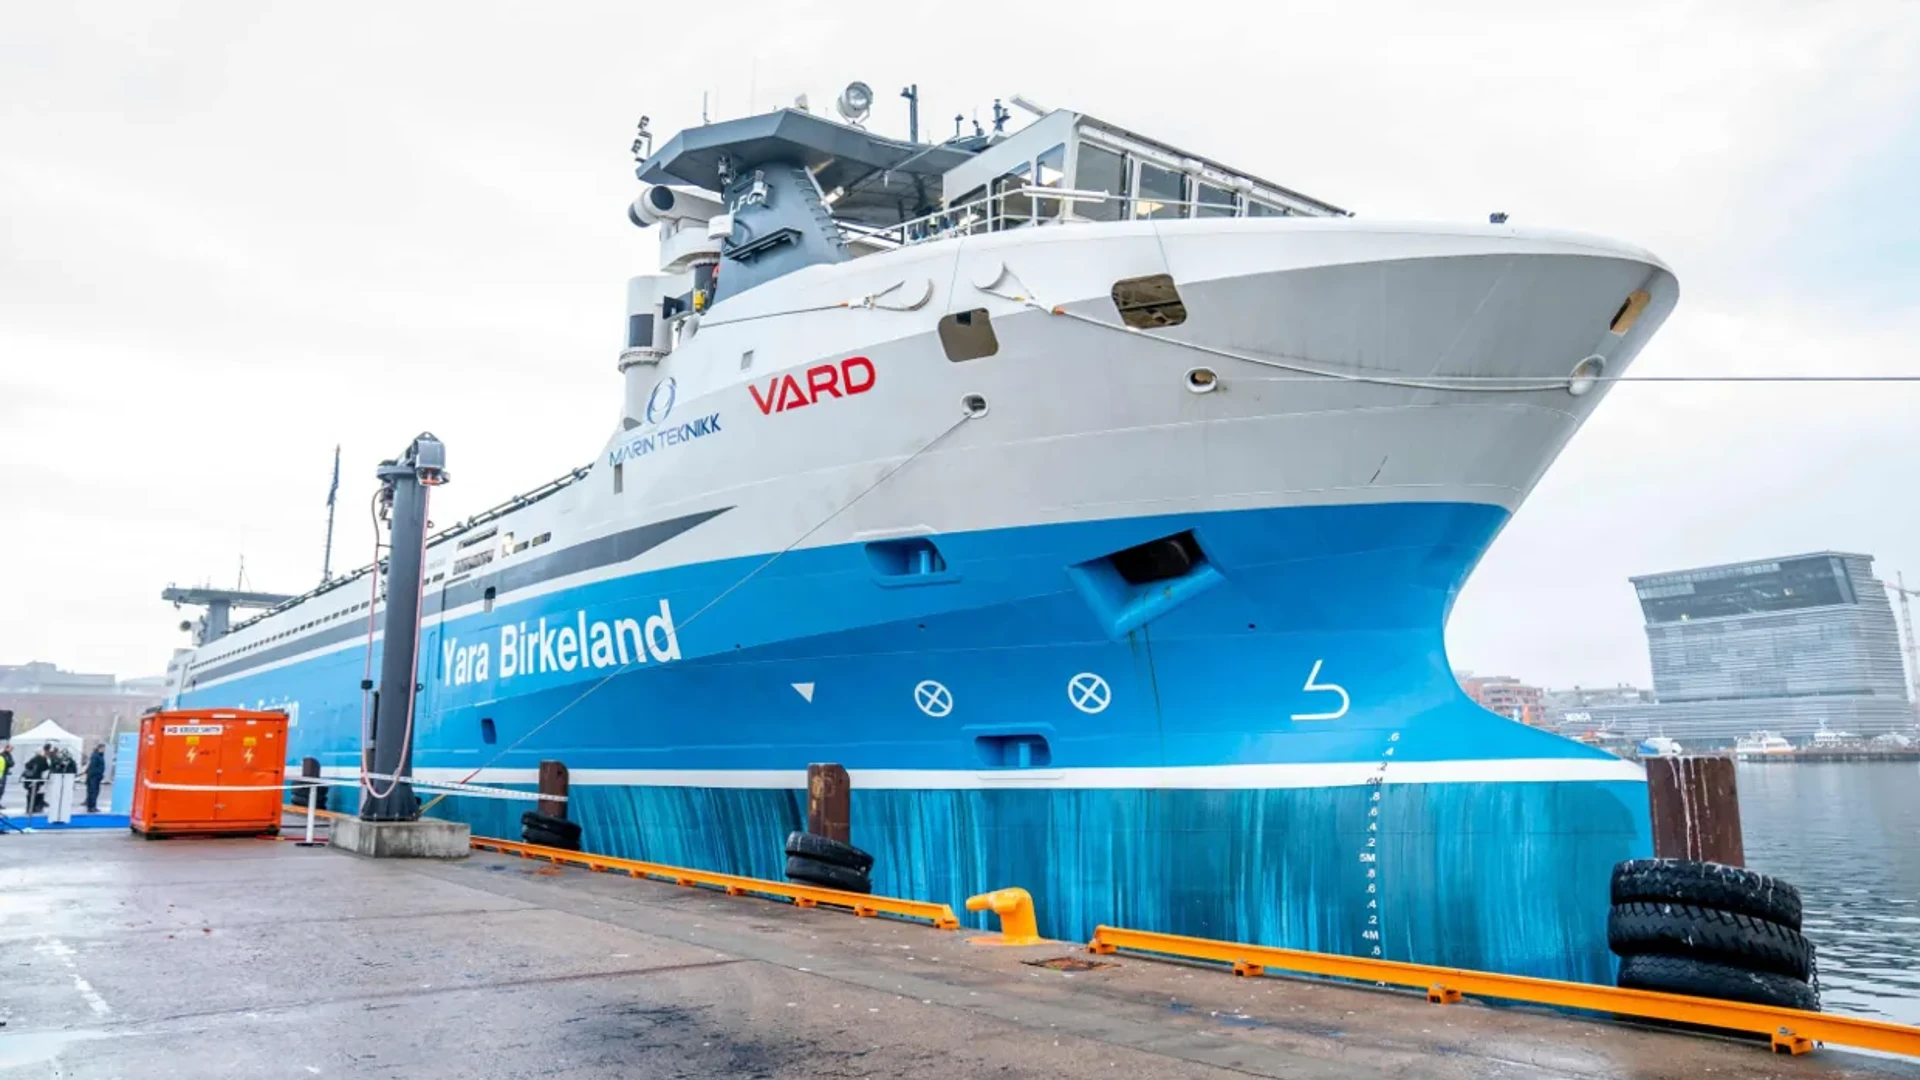 In Norway, The World’s First Fully Autonomous Electric Cargo Ship Is Launched